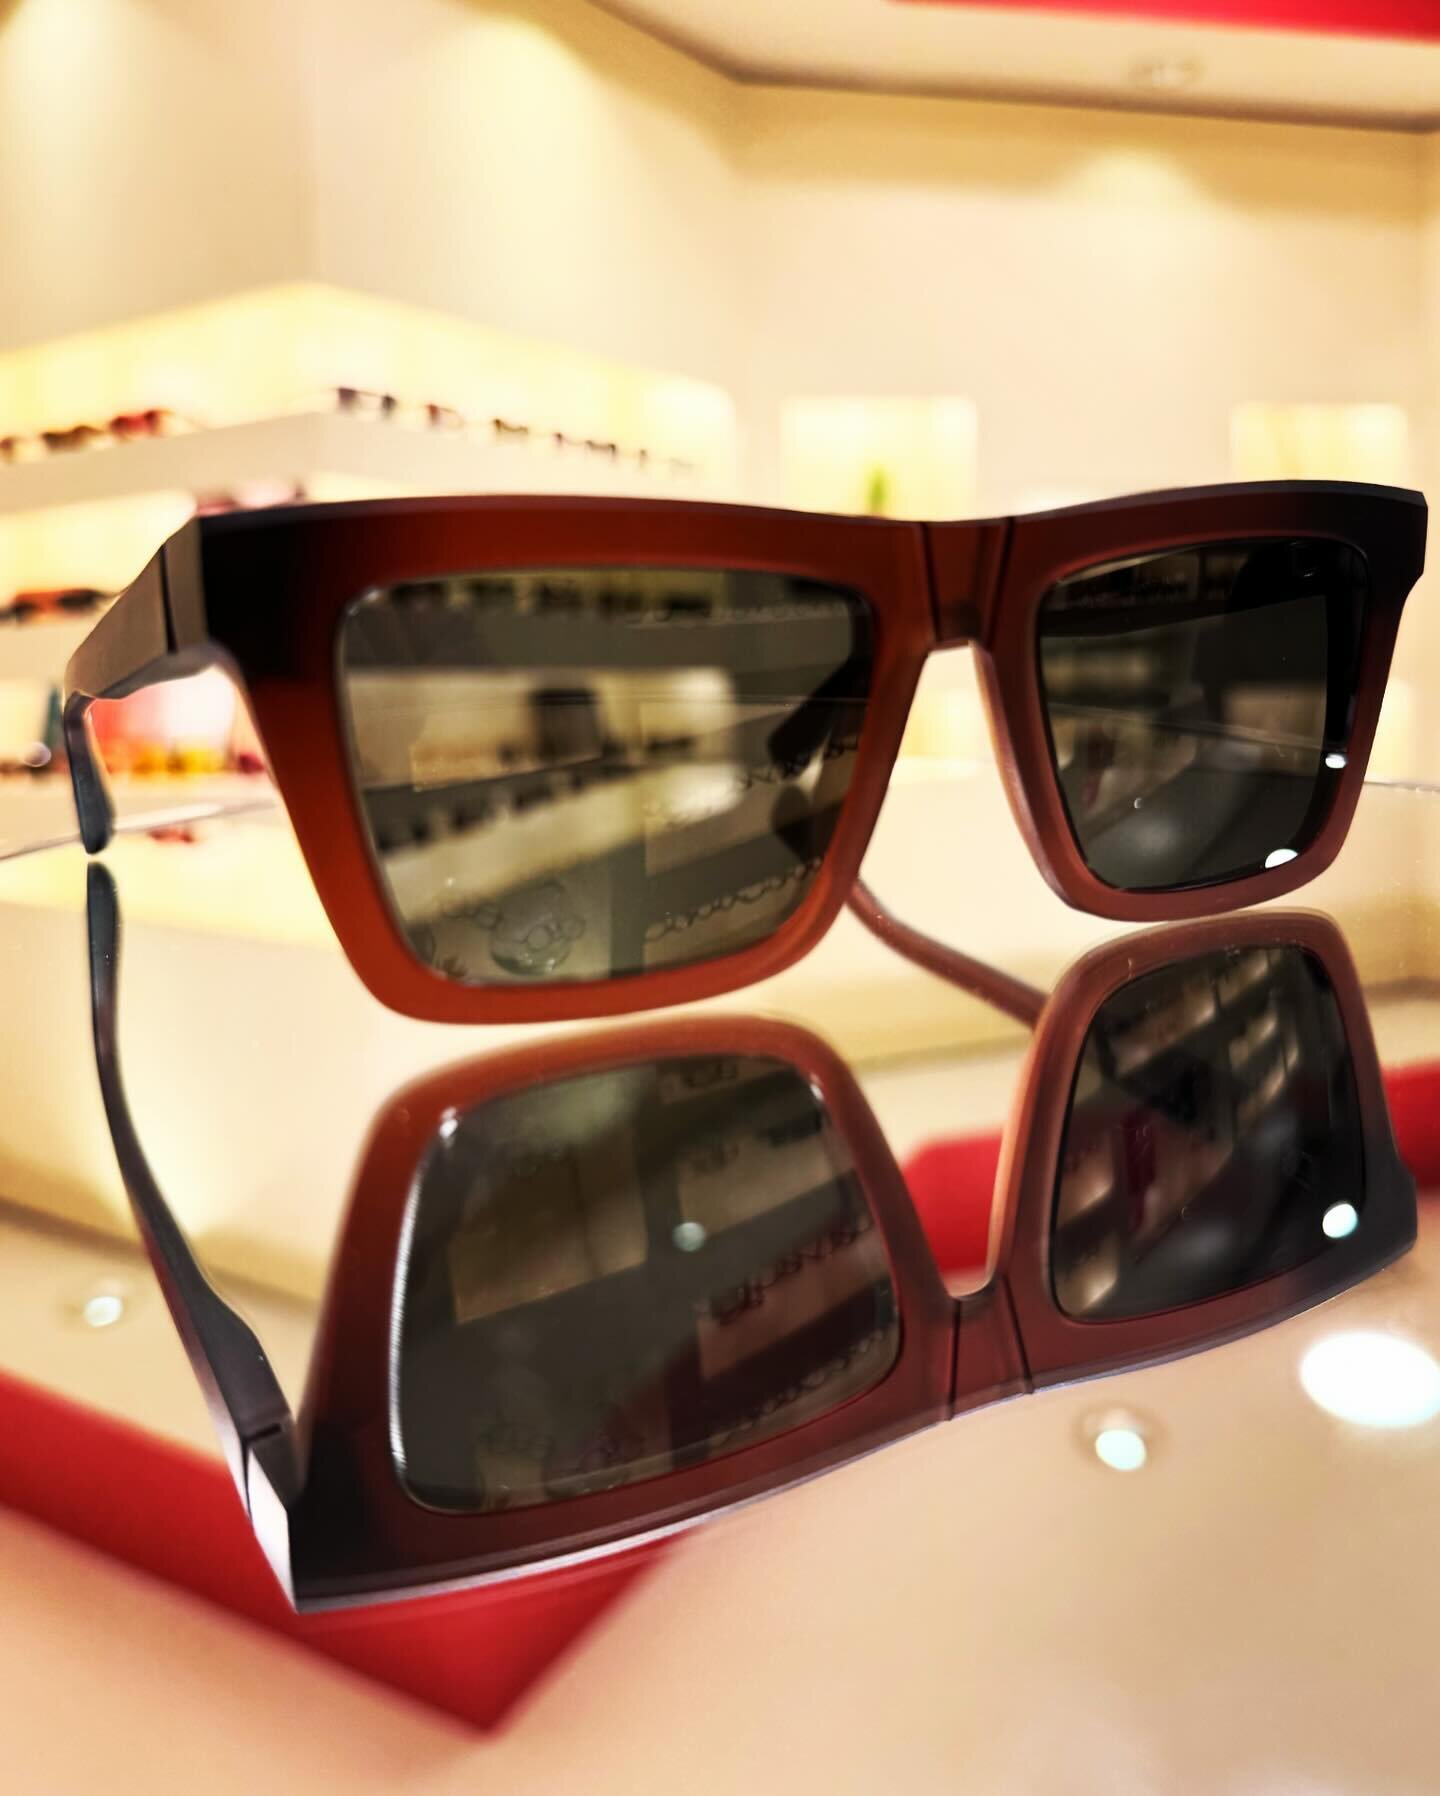 Brand new frames from Mykita are in! Amazing new spring #sunglasses along with some great new optical styles.